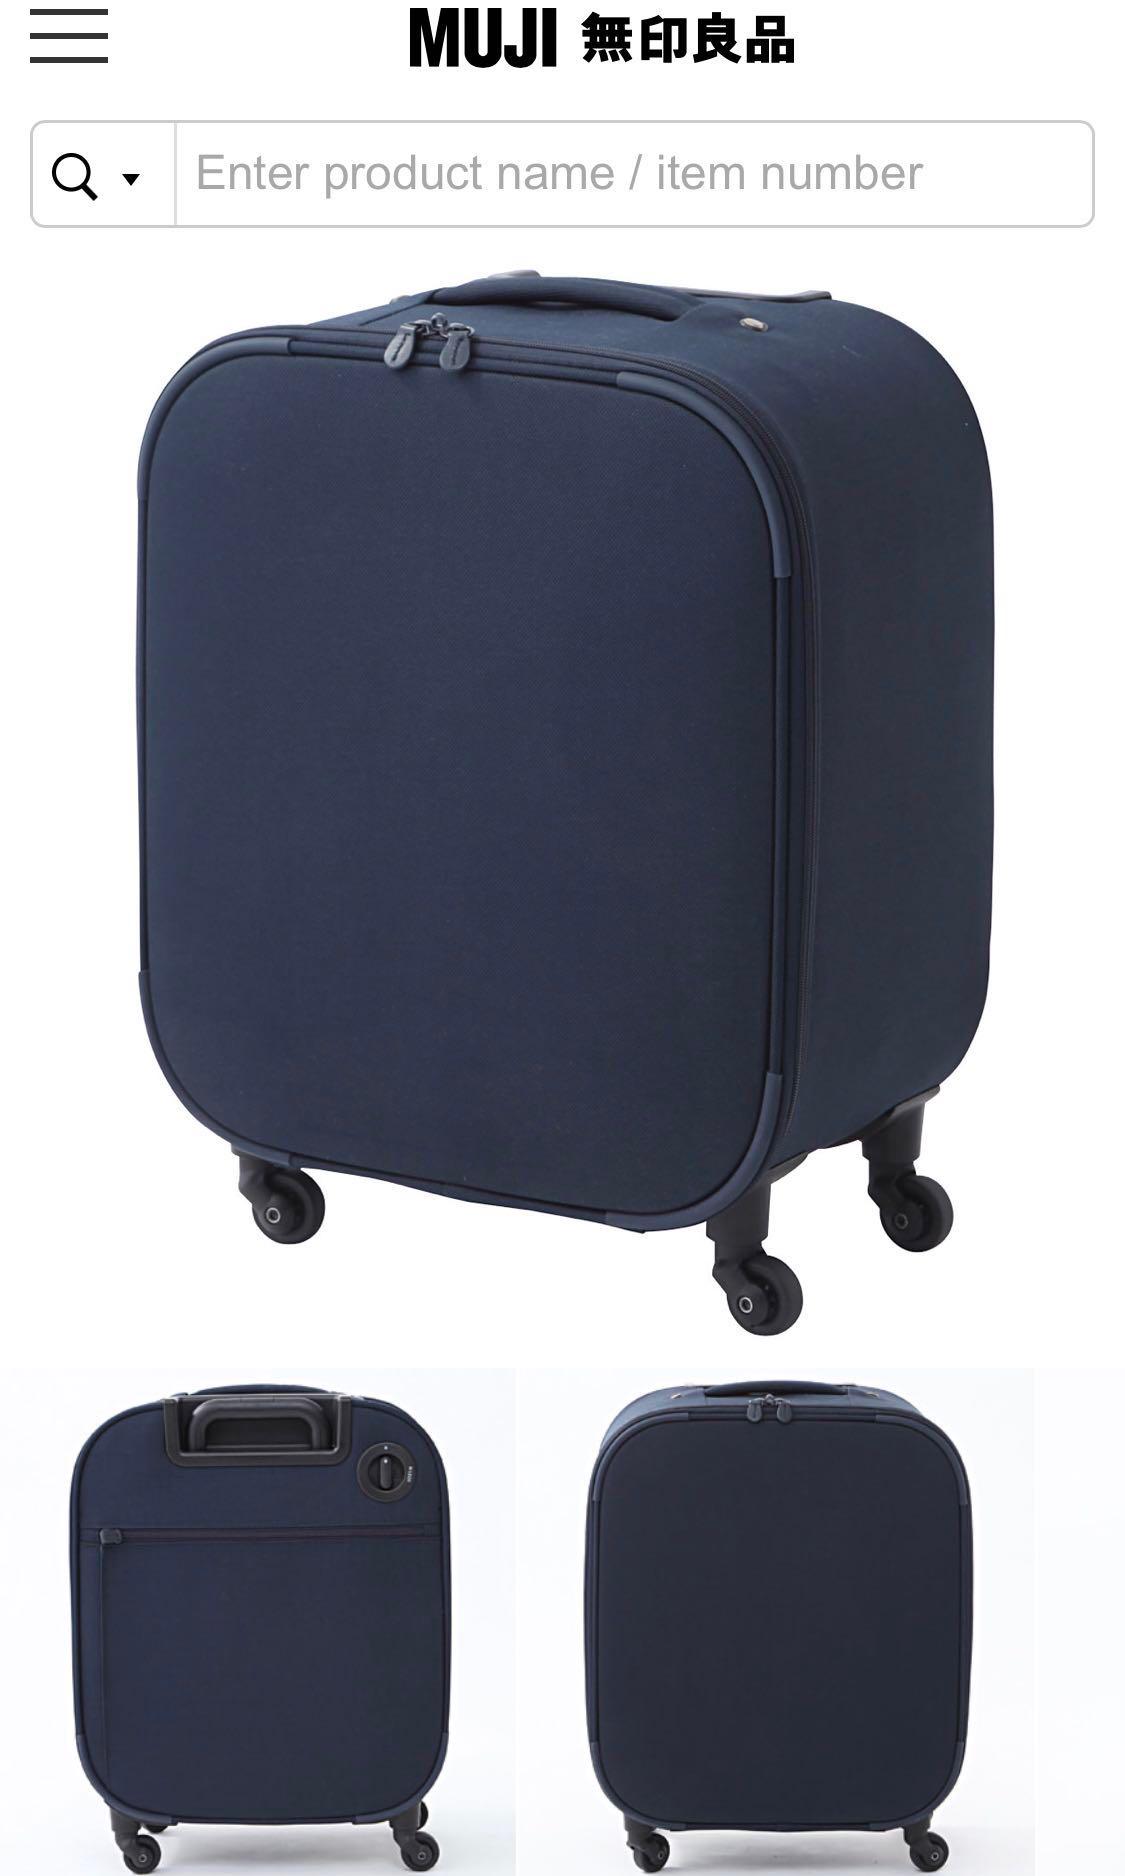 Muji Soft Carry Suitcase | vlr.eng.br